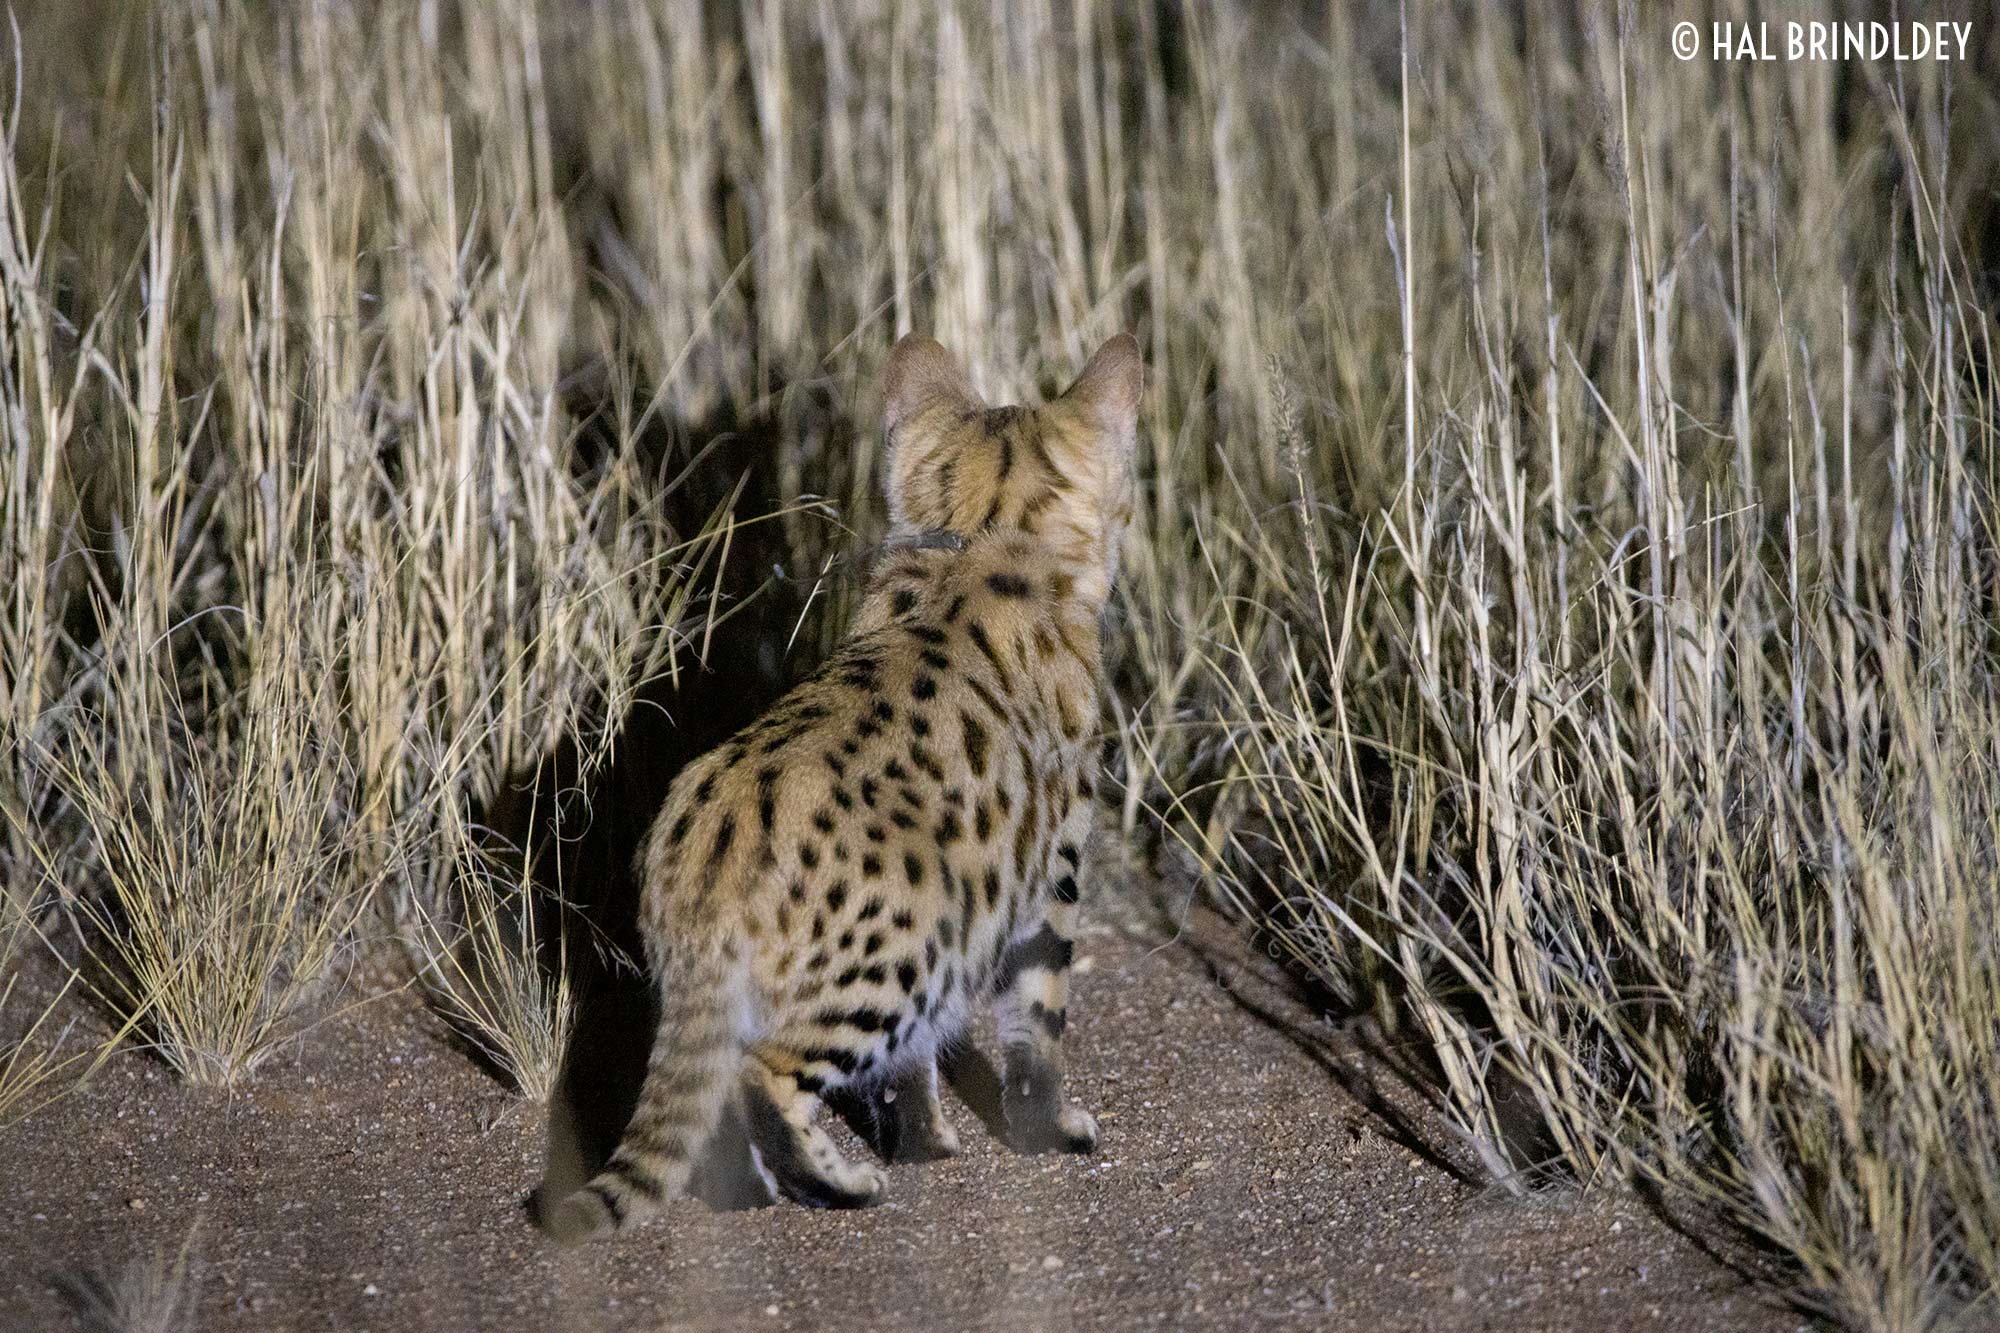 View of the black fur on the soles of the feet of the black-footed cat